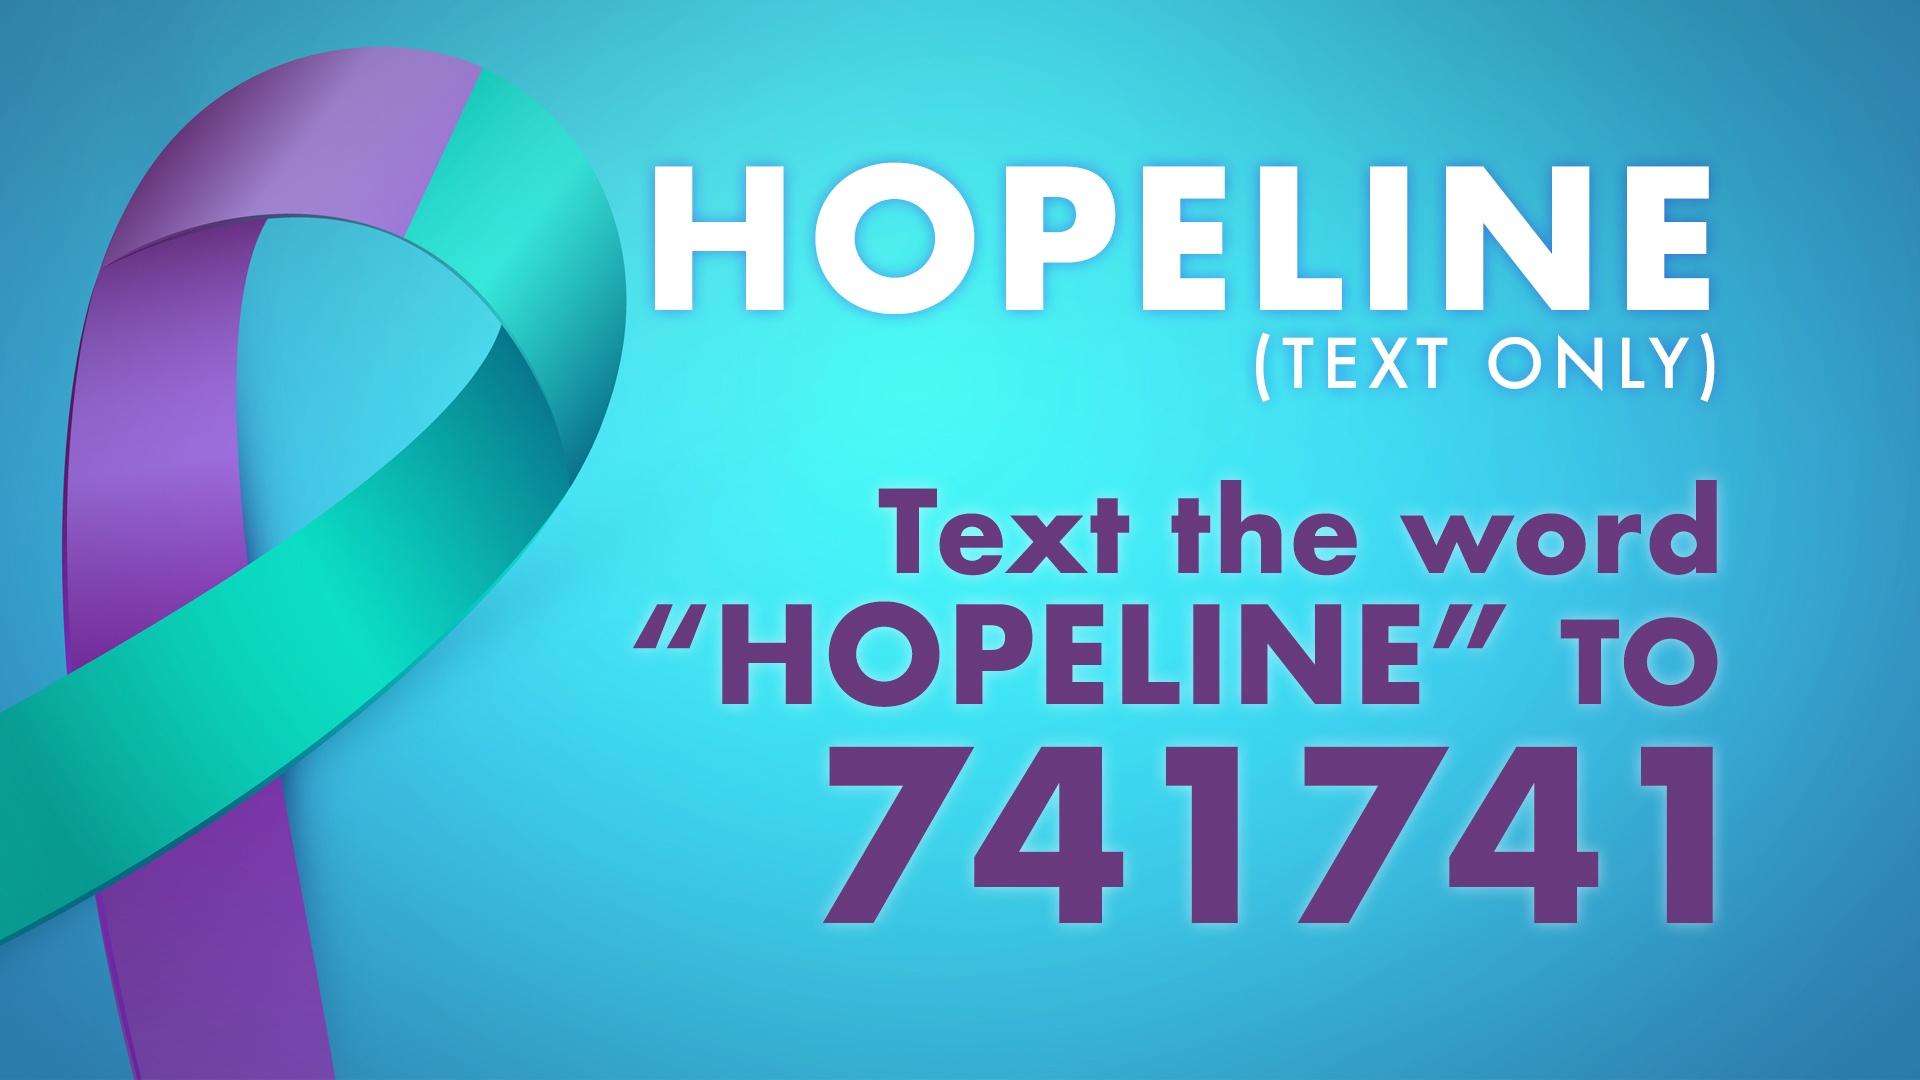 Text the word "Hopeline" to 741741